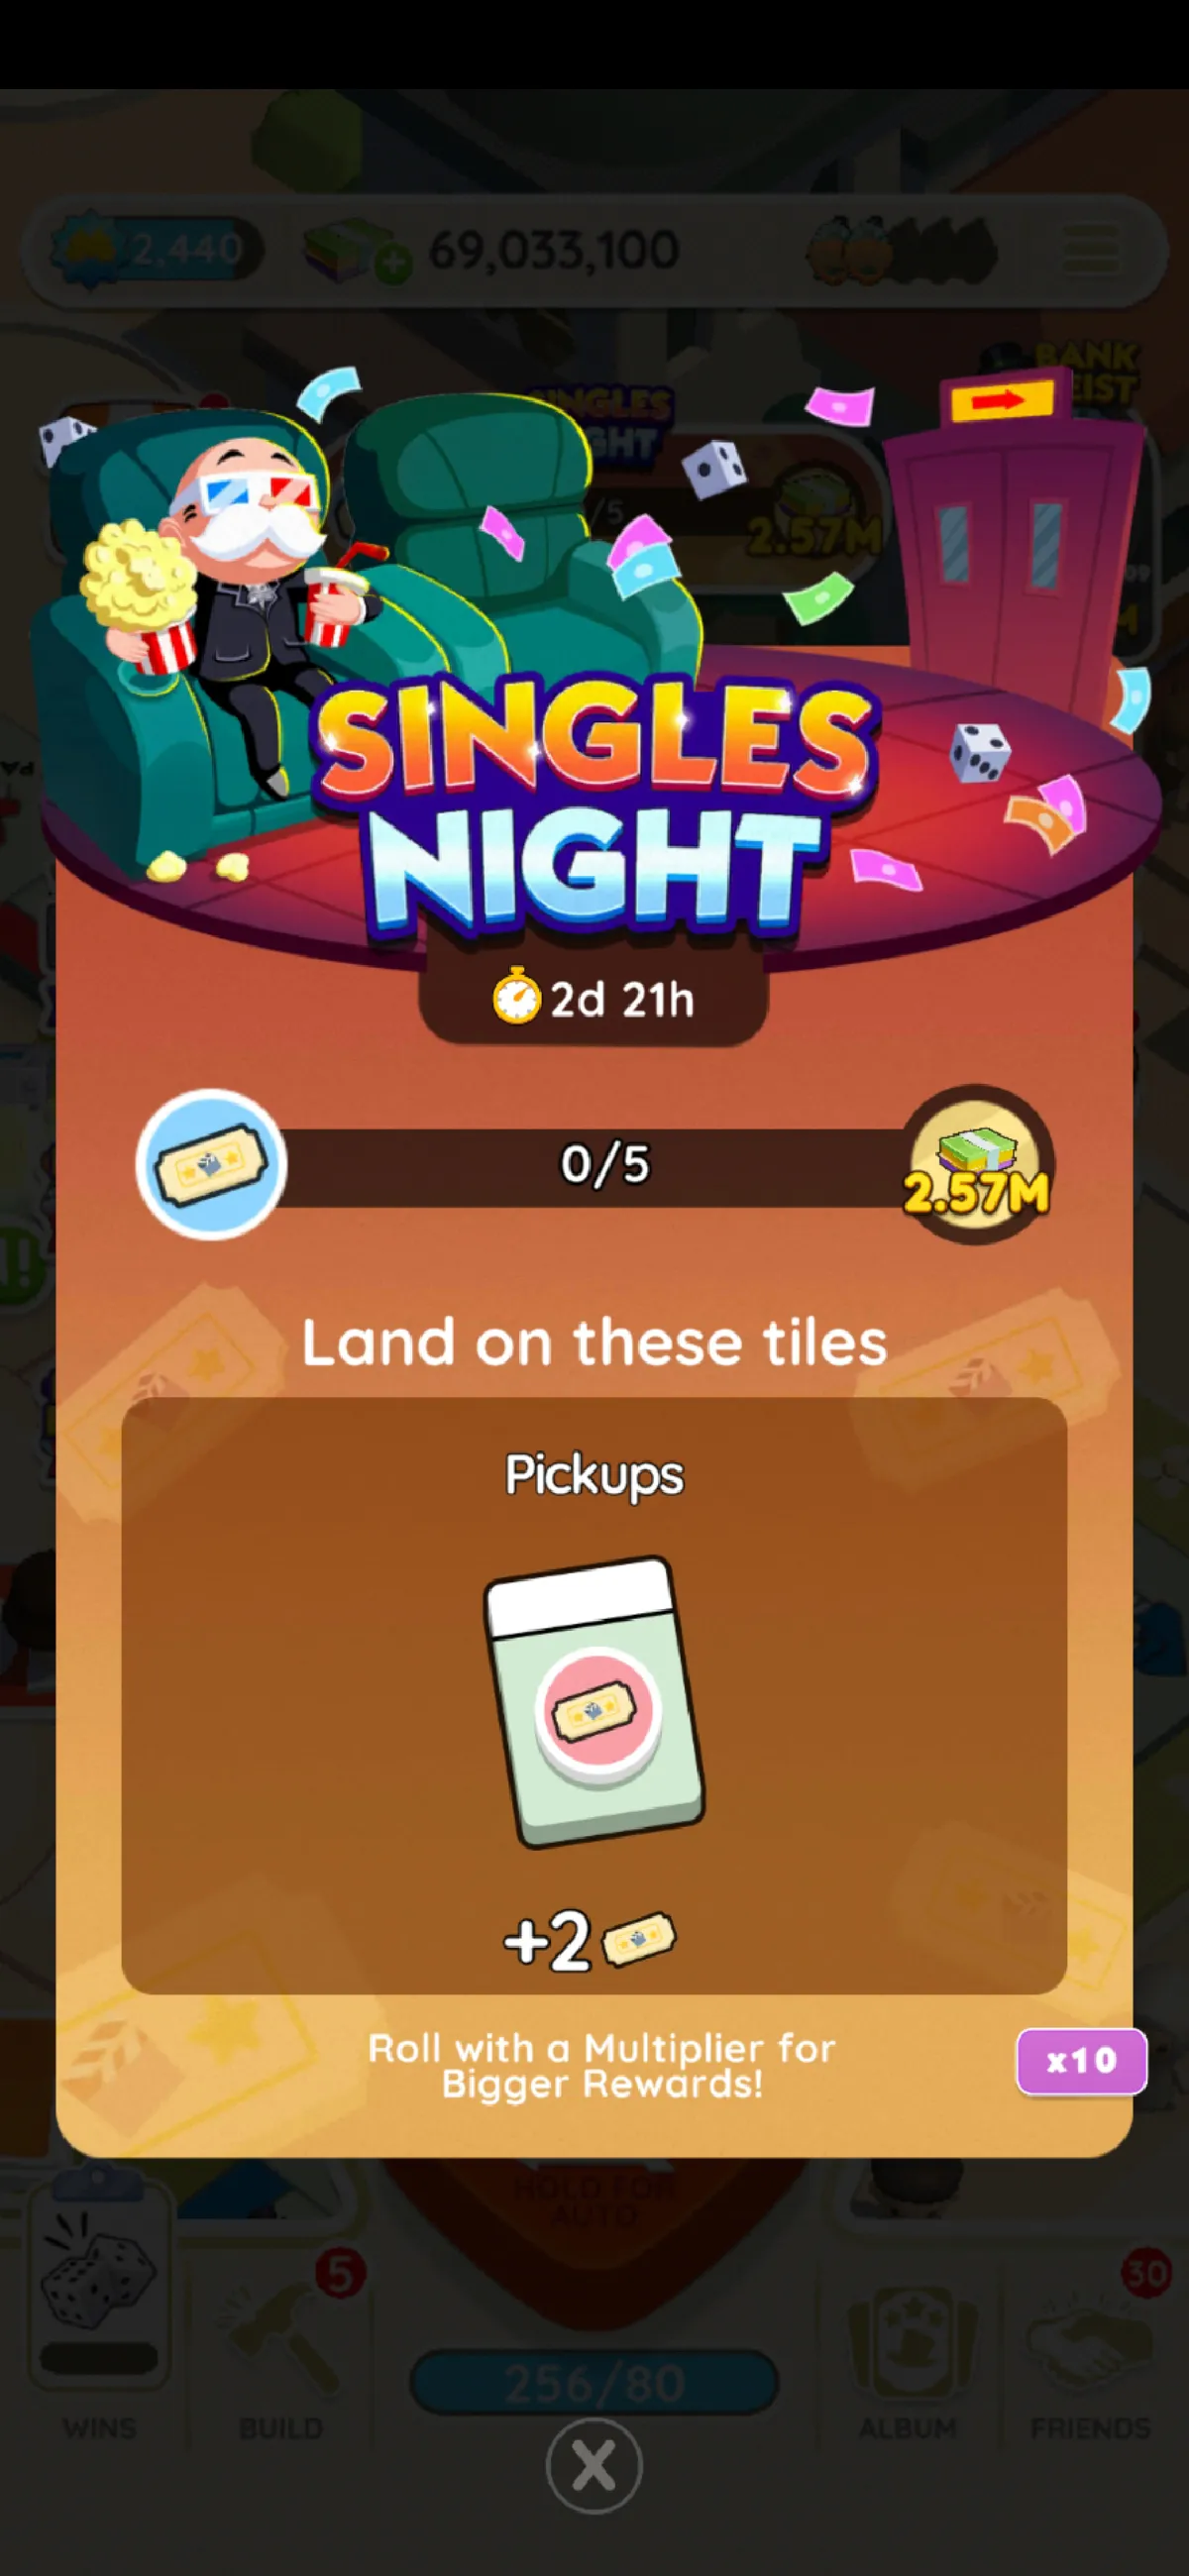 A full-sized image for the Singles Night event in Monopoly GO showing Rich Uncle Pennybags sitting in a recliner and watching a movie. He has 3d glasses on and is holding popcorn. The image is part of an article detailing all the rewards, prizes, and milestones players can get as part of the "Singles Night" event in Monopoly GO.